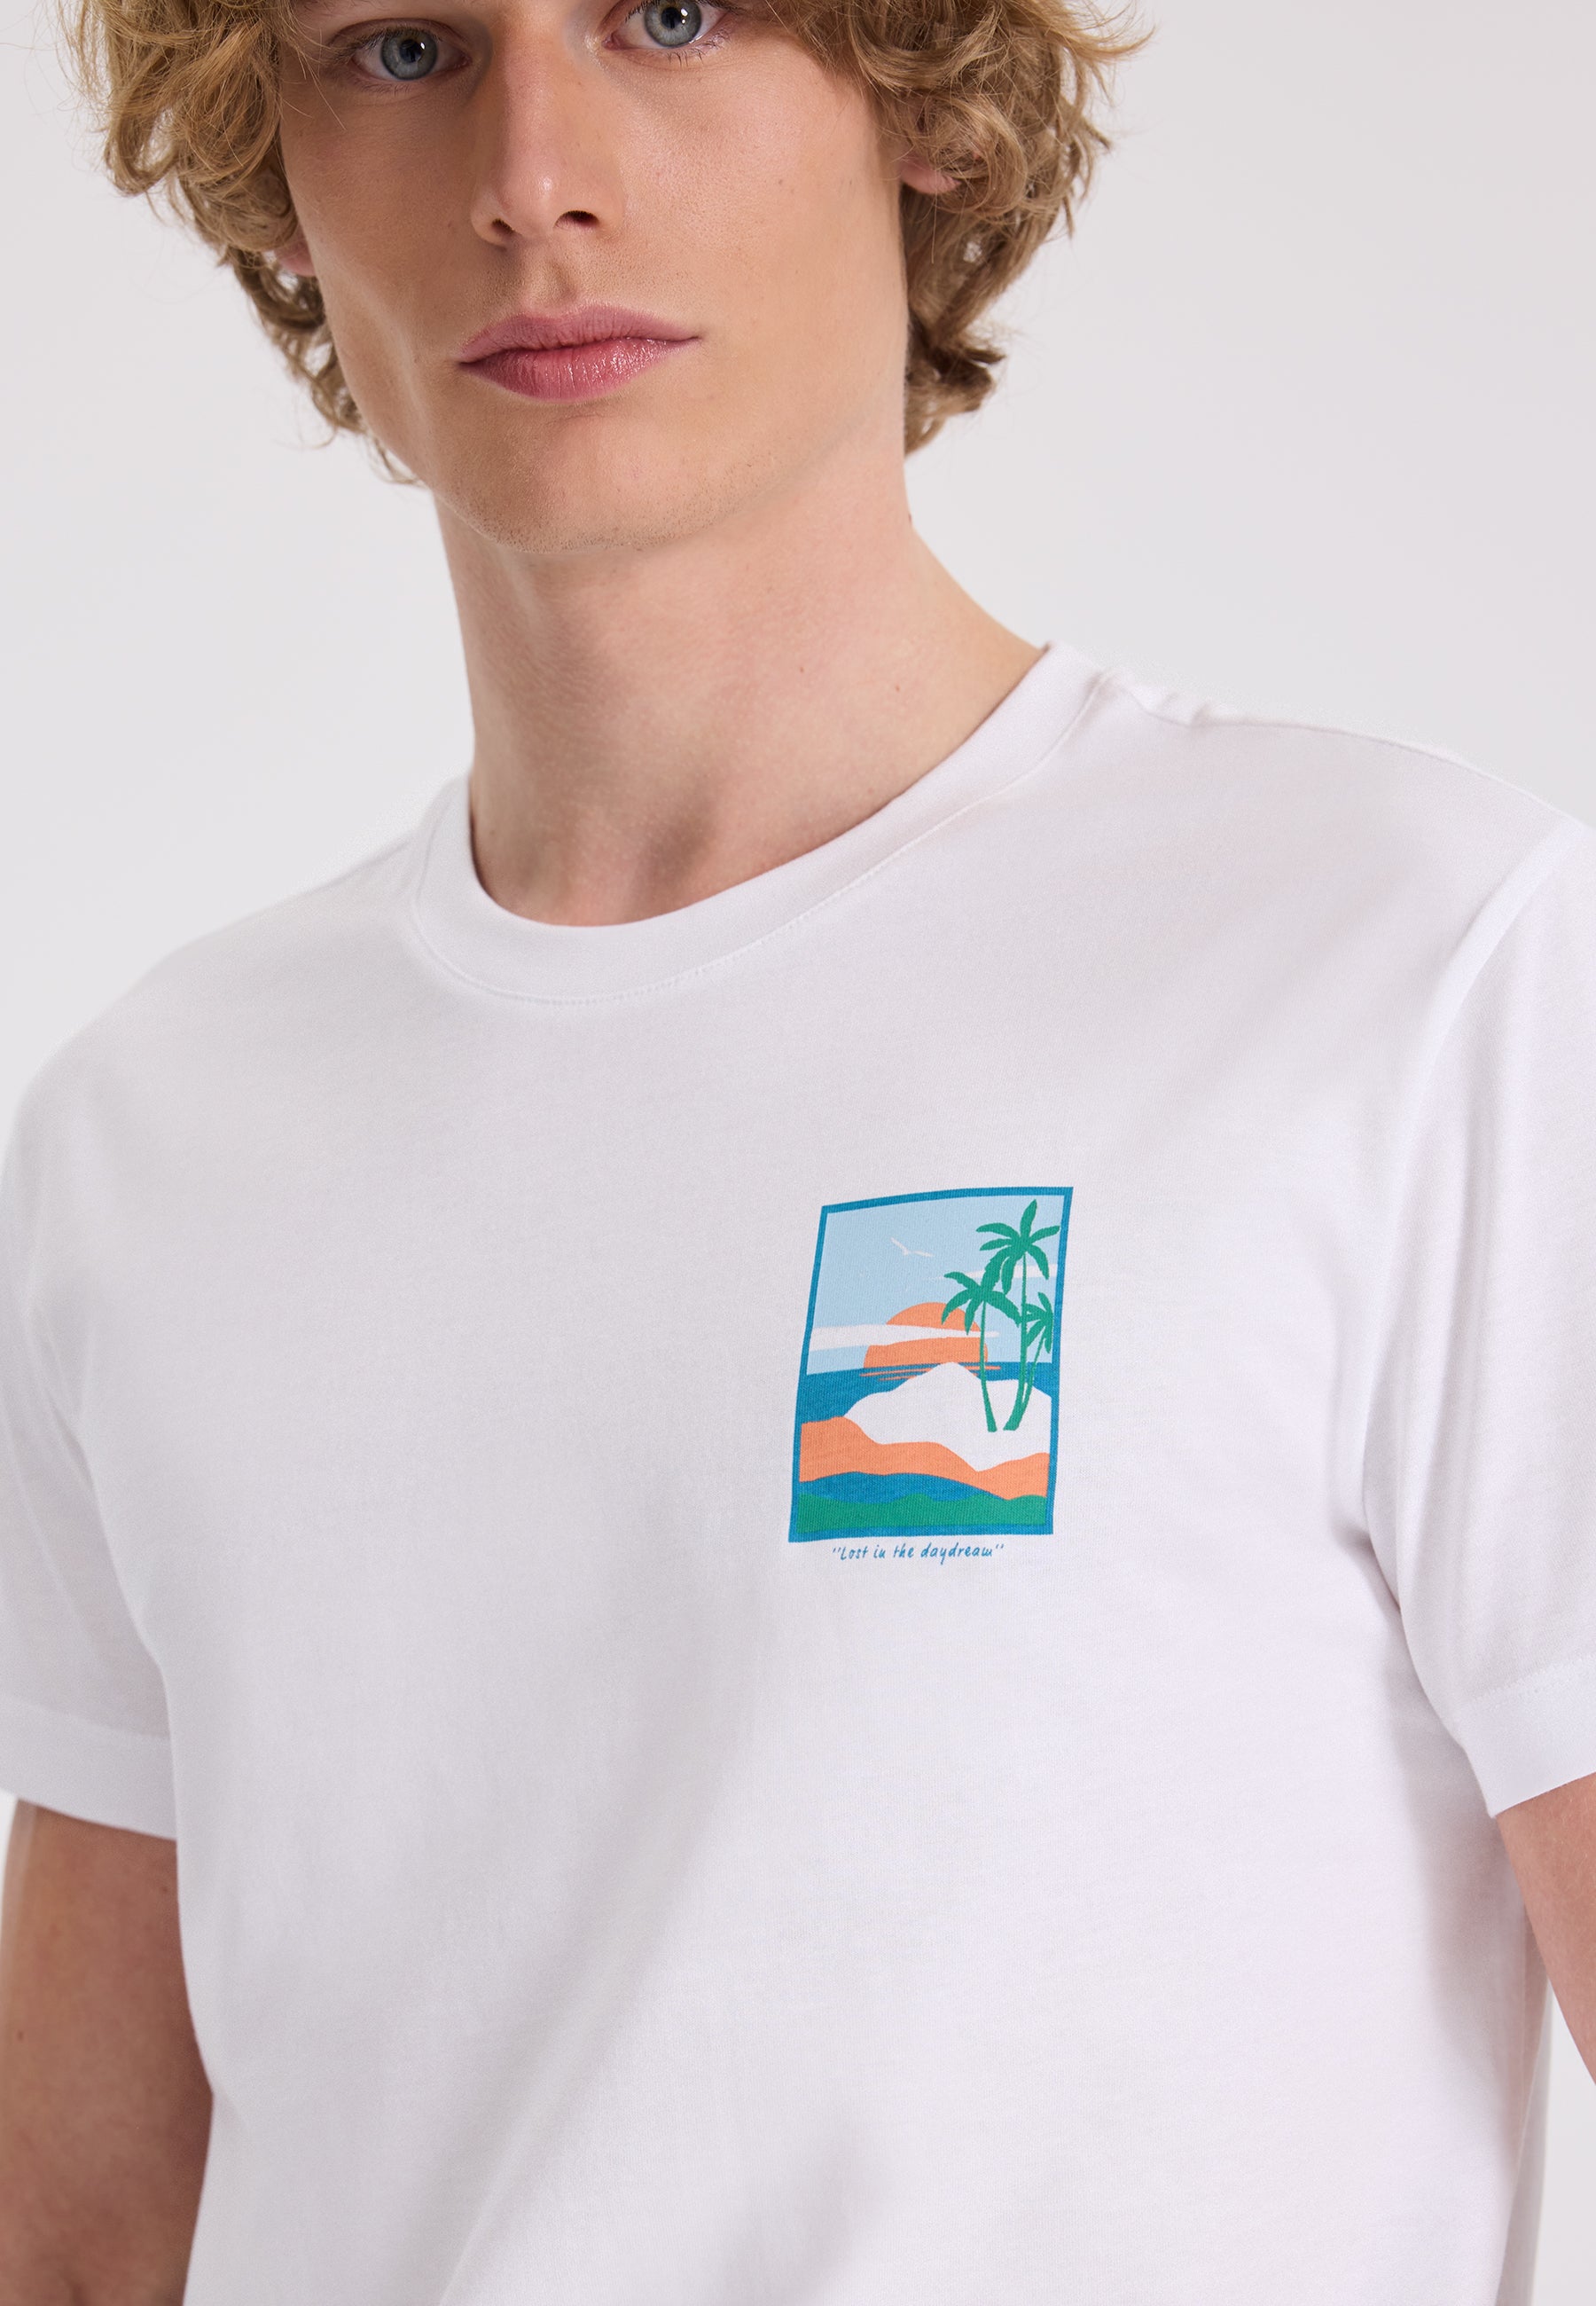 WMBACK SUNSET TEE in White